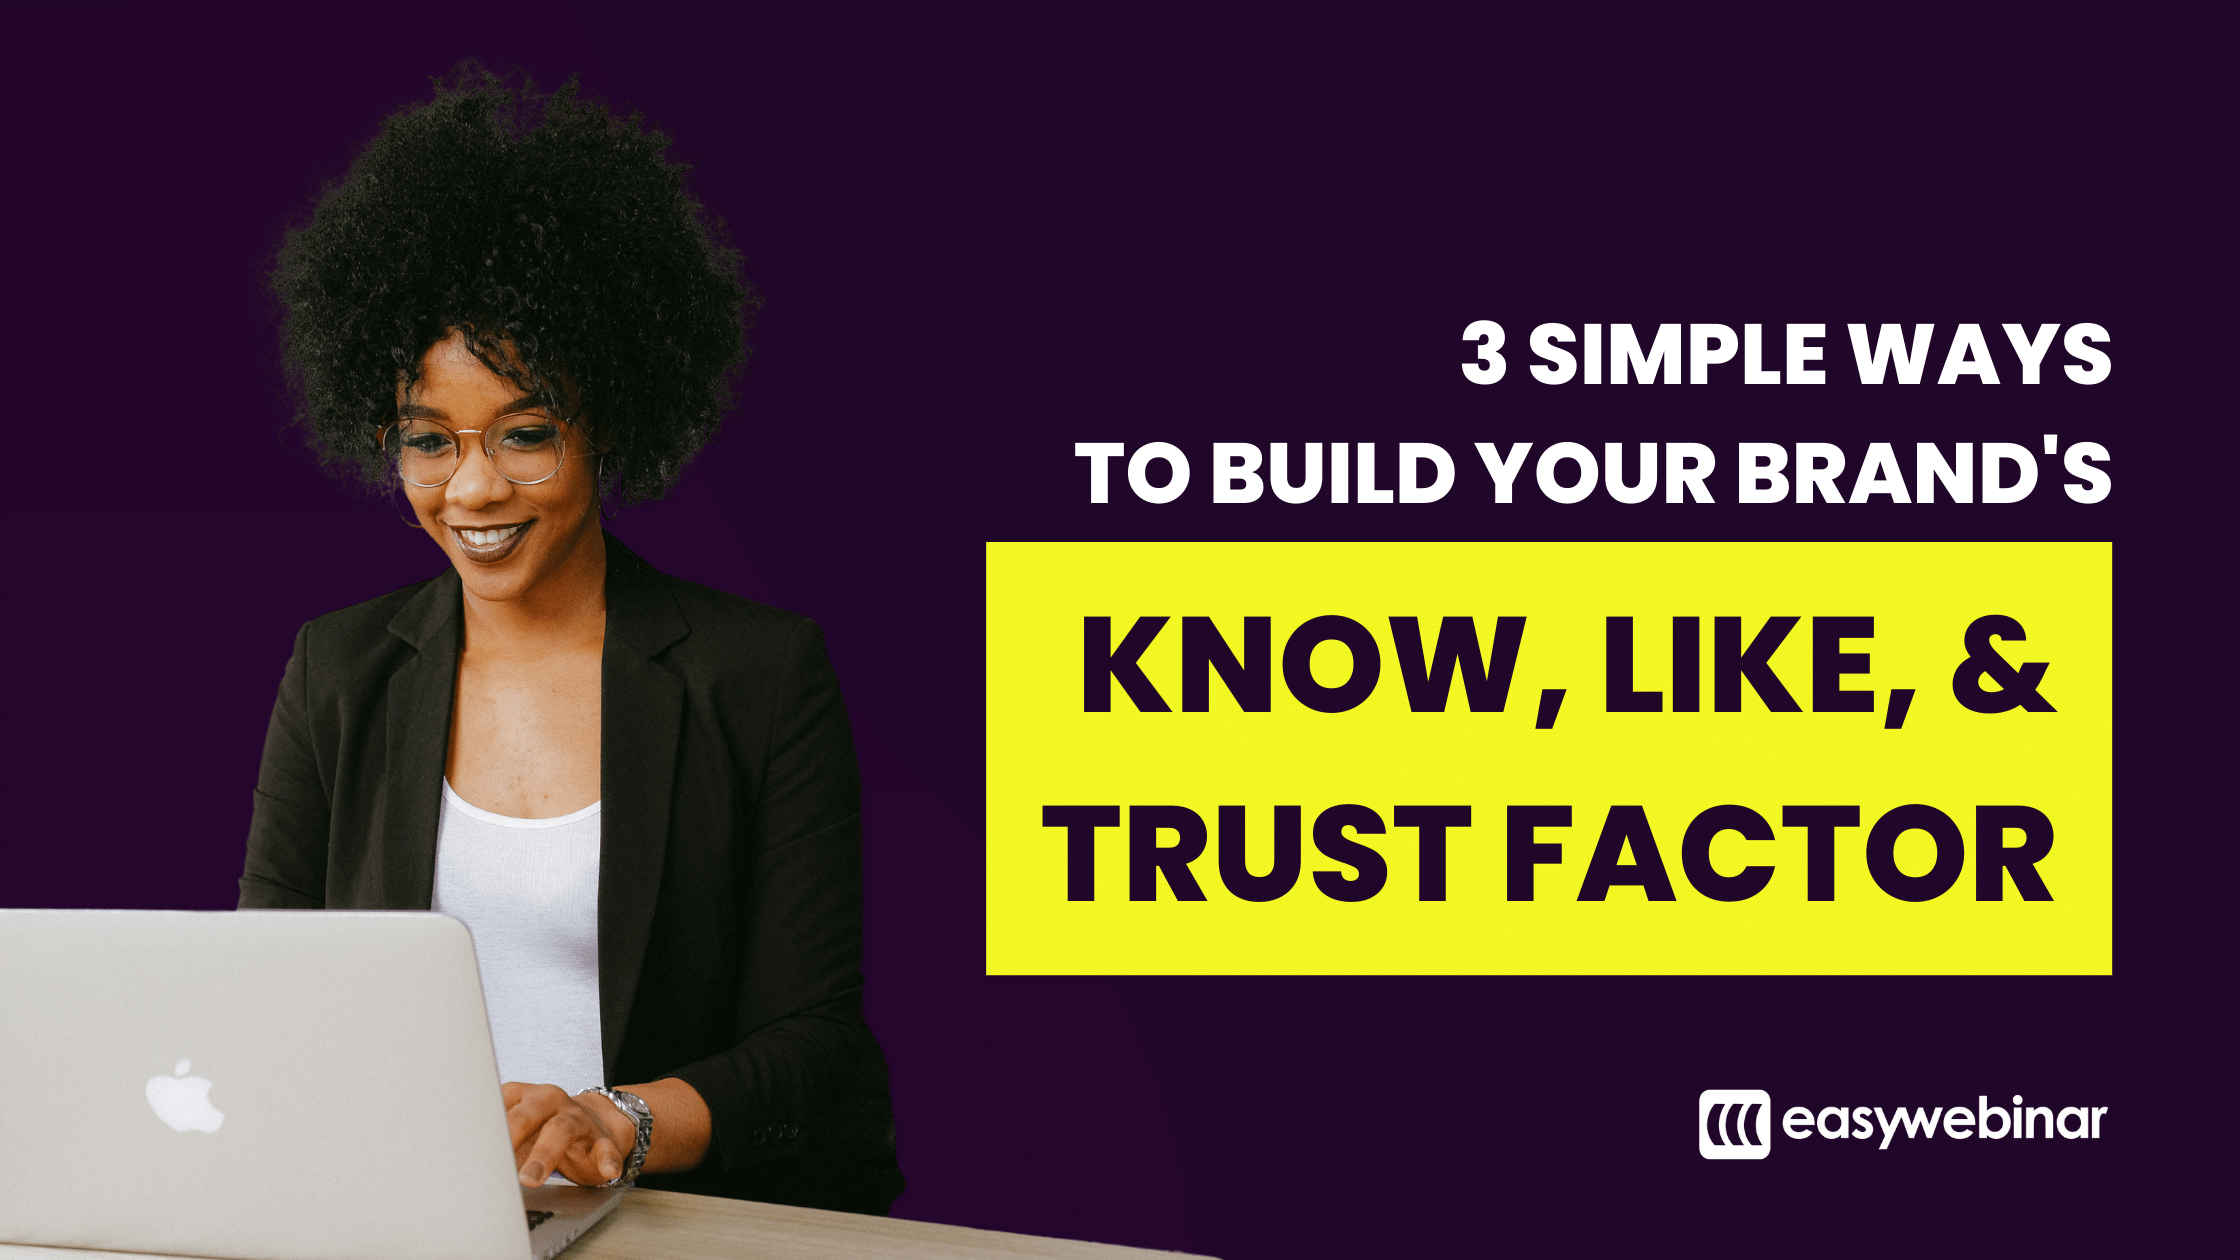 3 Simple Ways to Build Your Brand's Know, Like, and Trust Factor by EasyWebinar